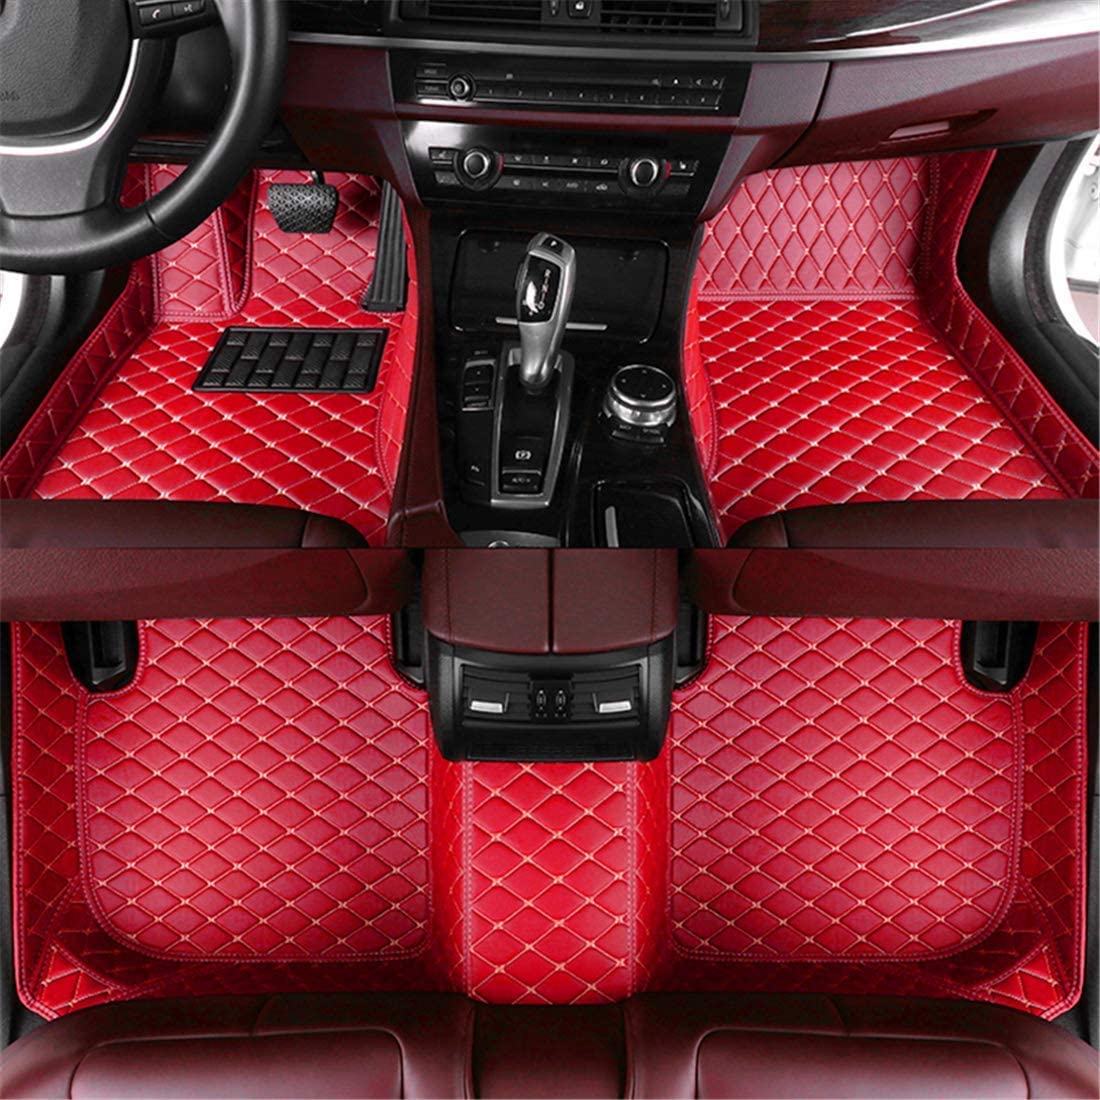 Car Floor Mats fit for Jaguar S-Type 2000-2007 Full Coverage All Weather Protection Non-Slip Leather Floor Liners